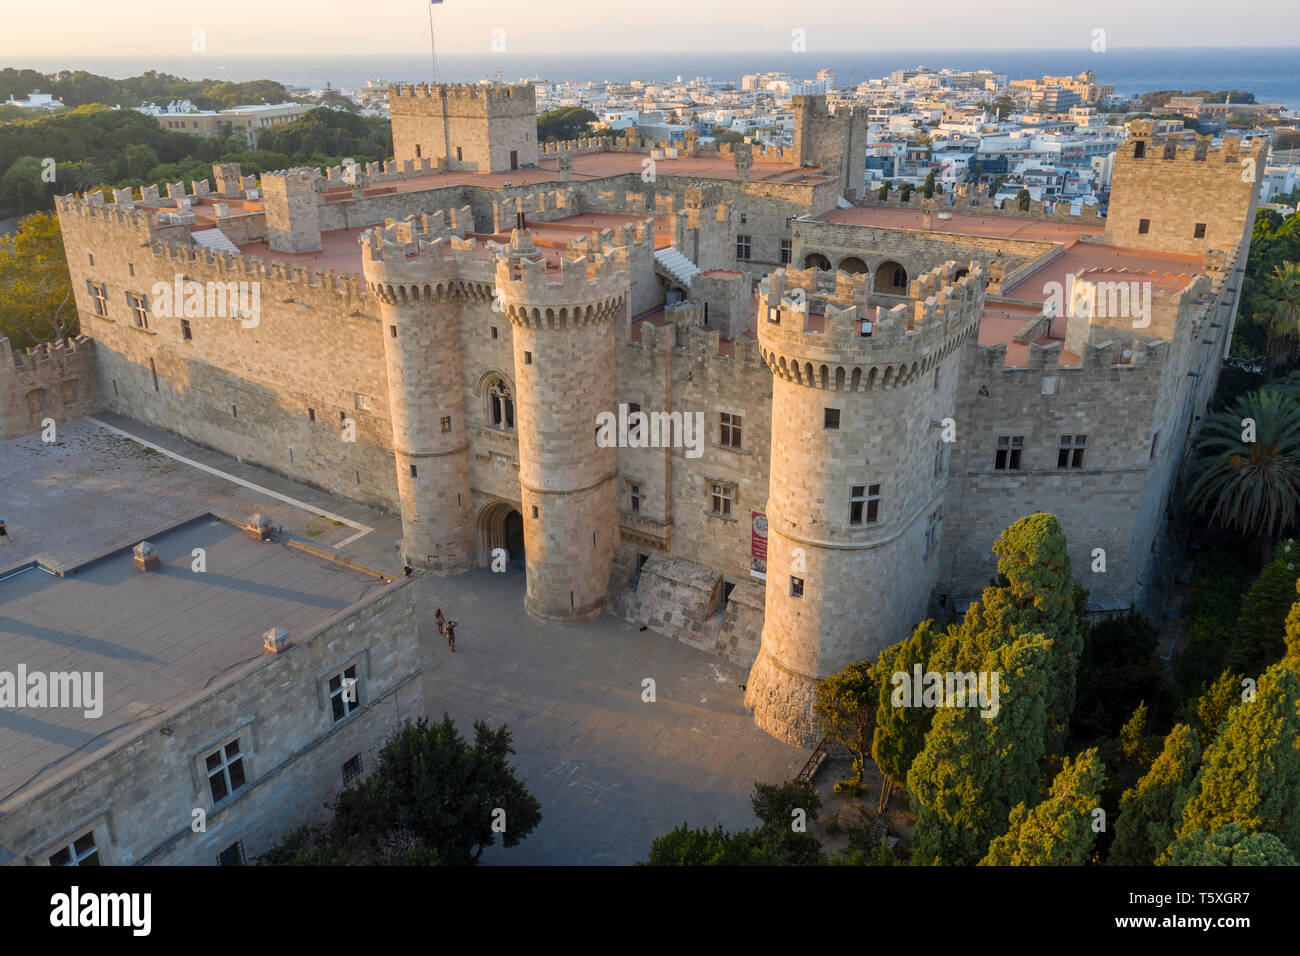 Palace of the Grand Masters - Sights of Rhodes